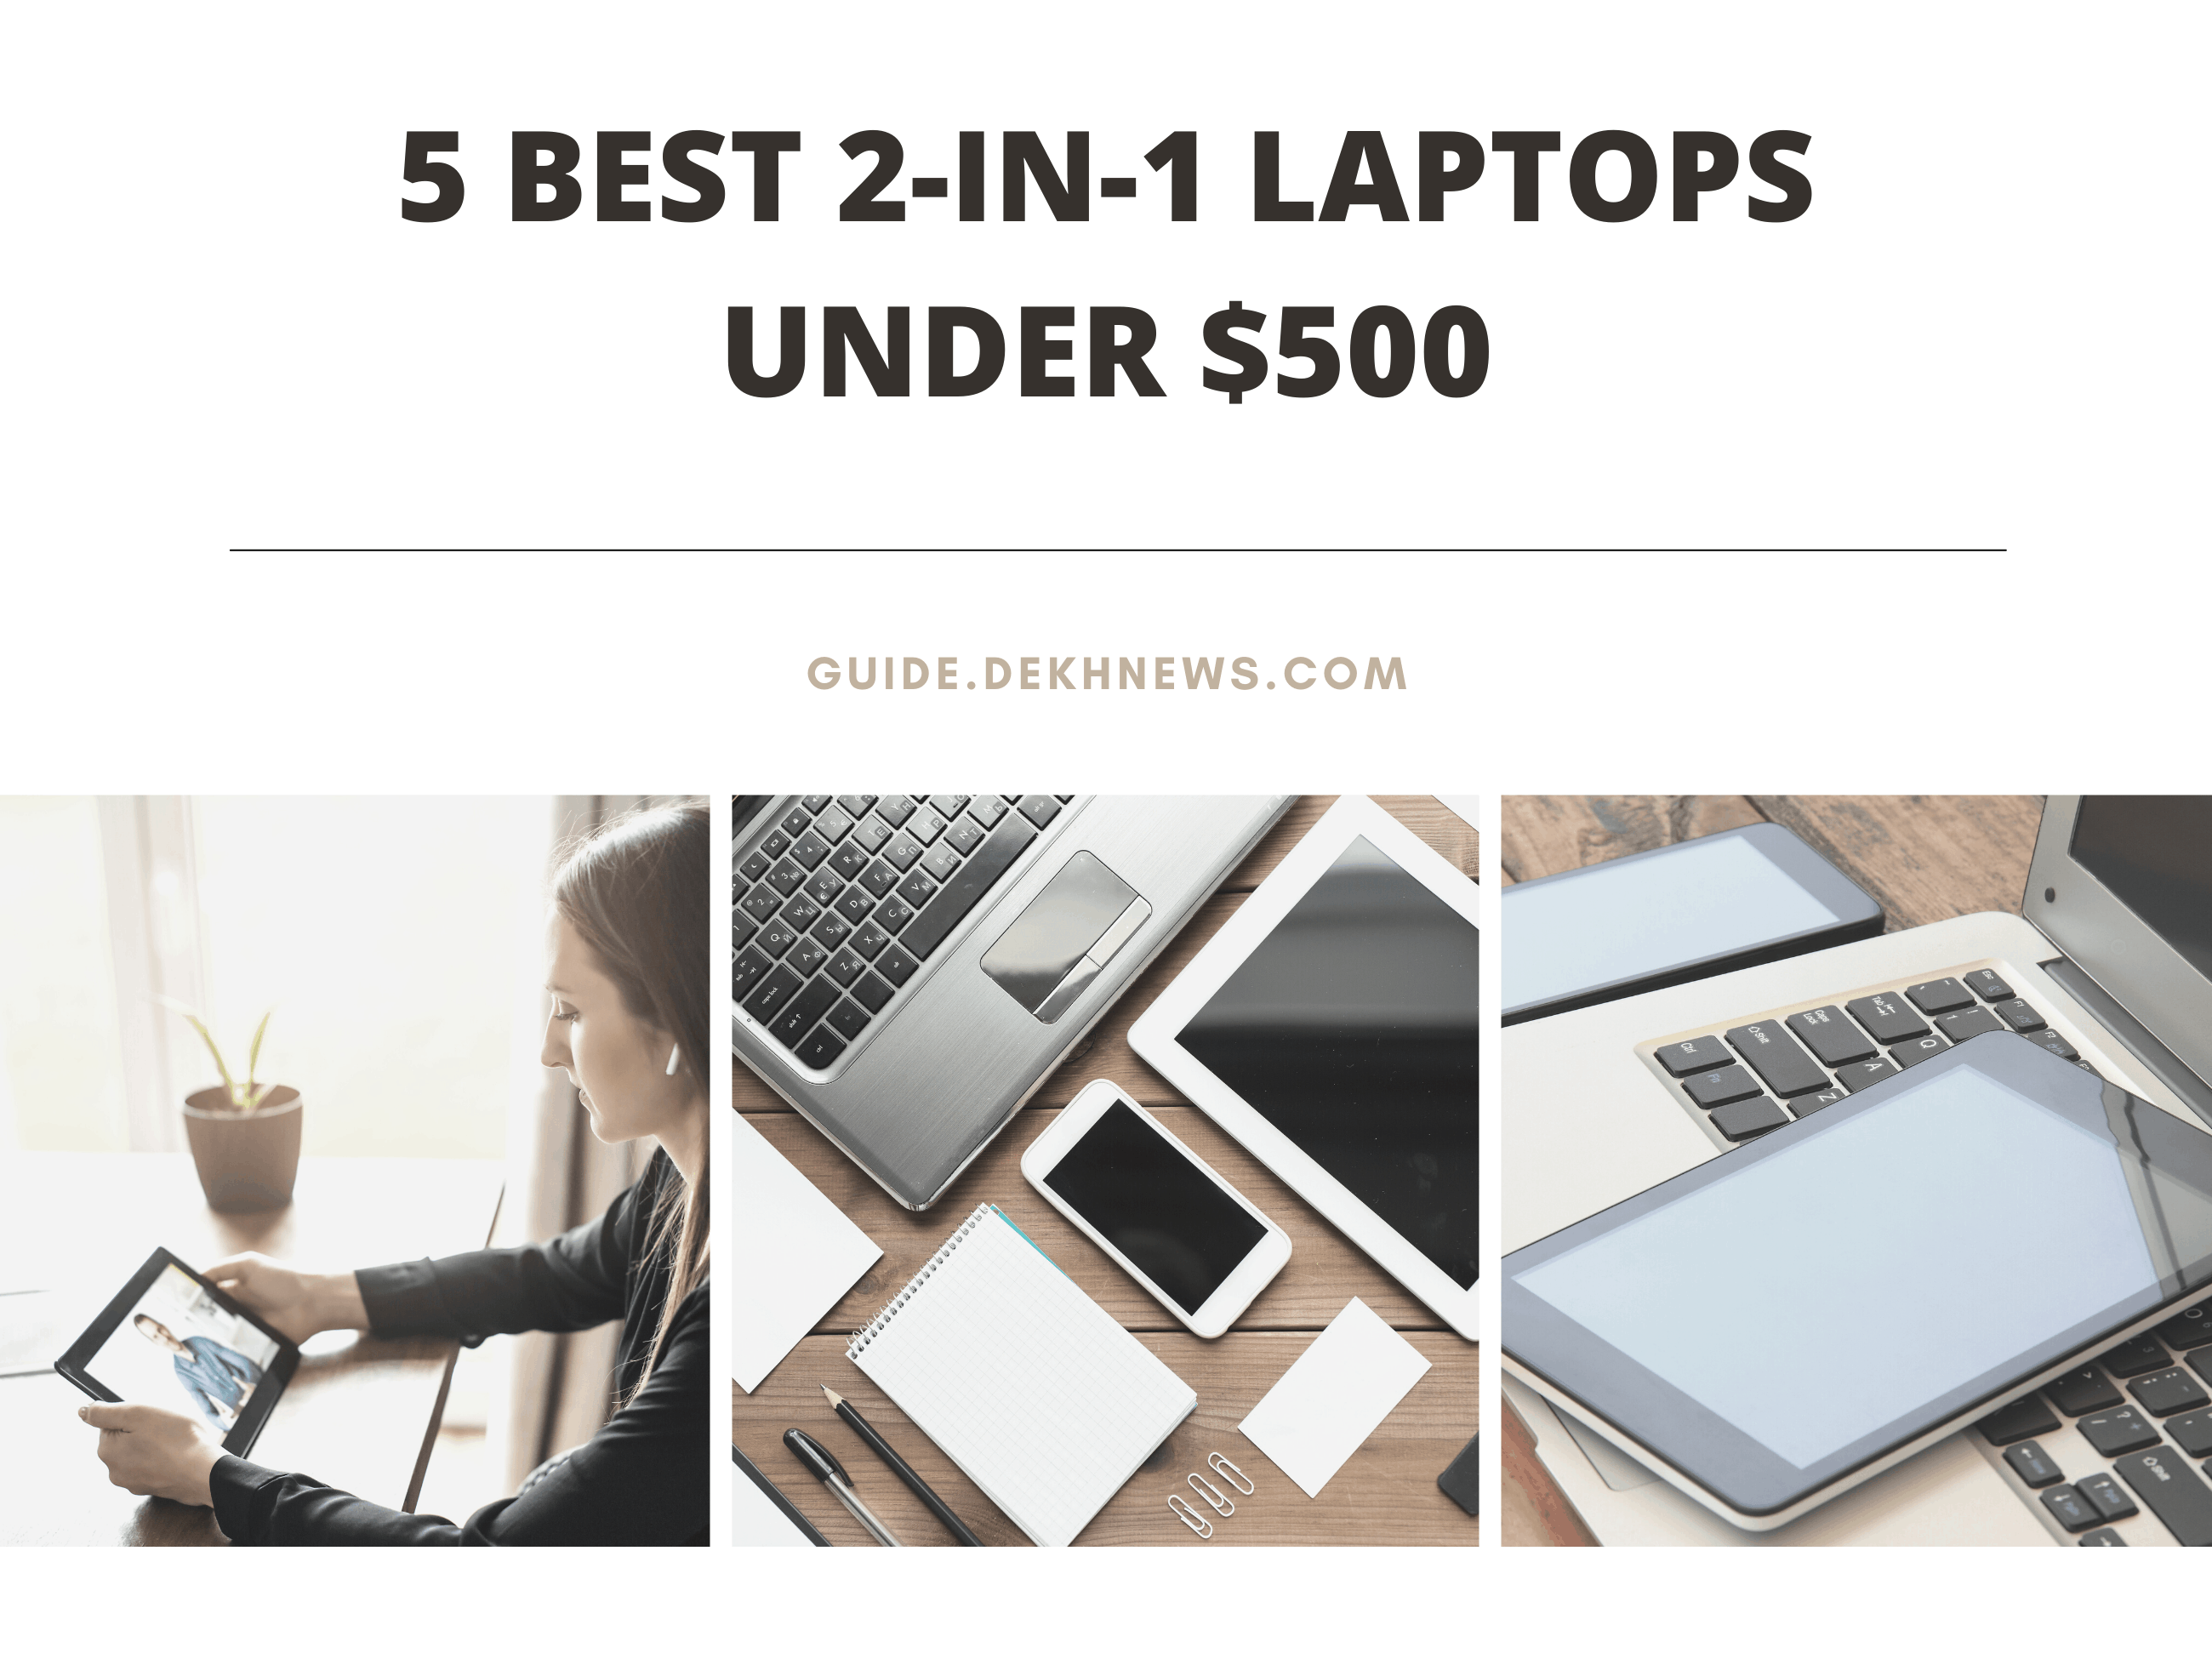 5 Best 2-in-1 Laptops under 500 in 2022 – Top Rated Models